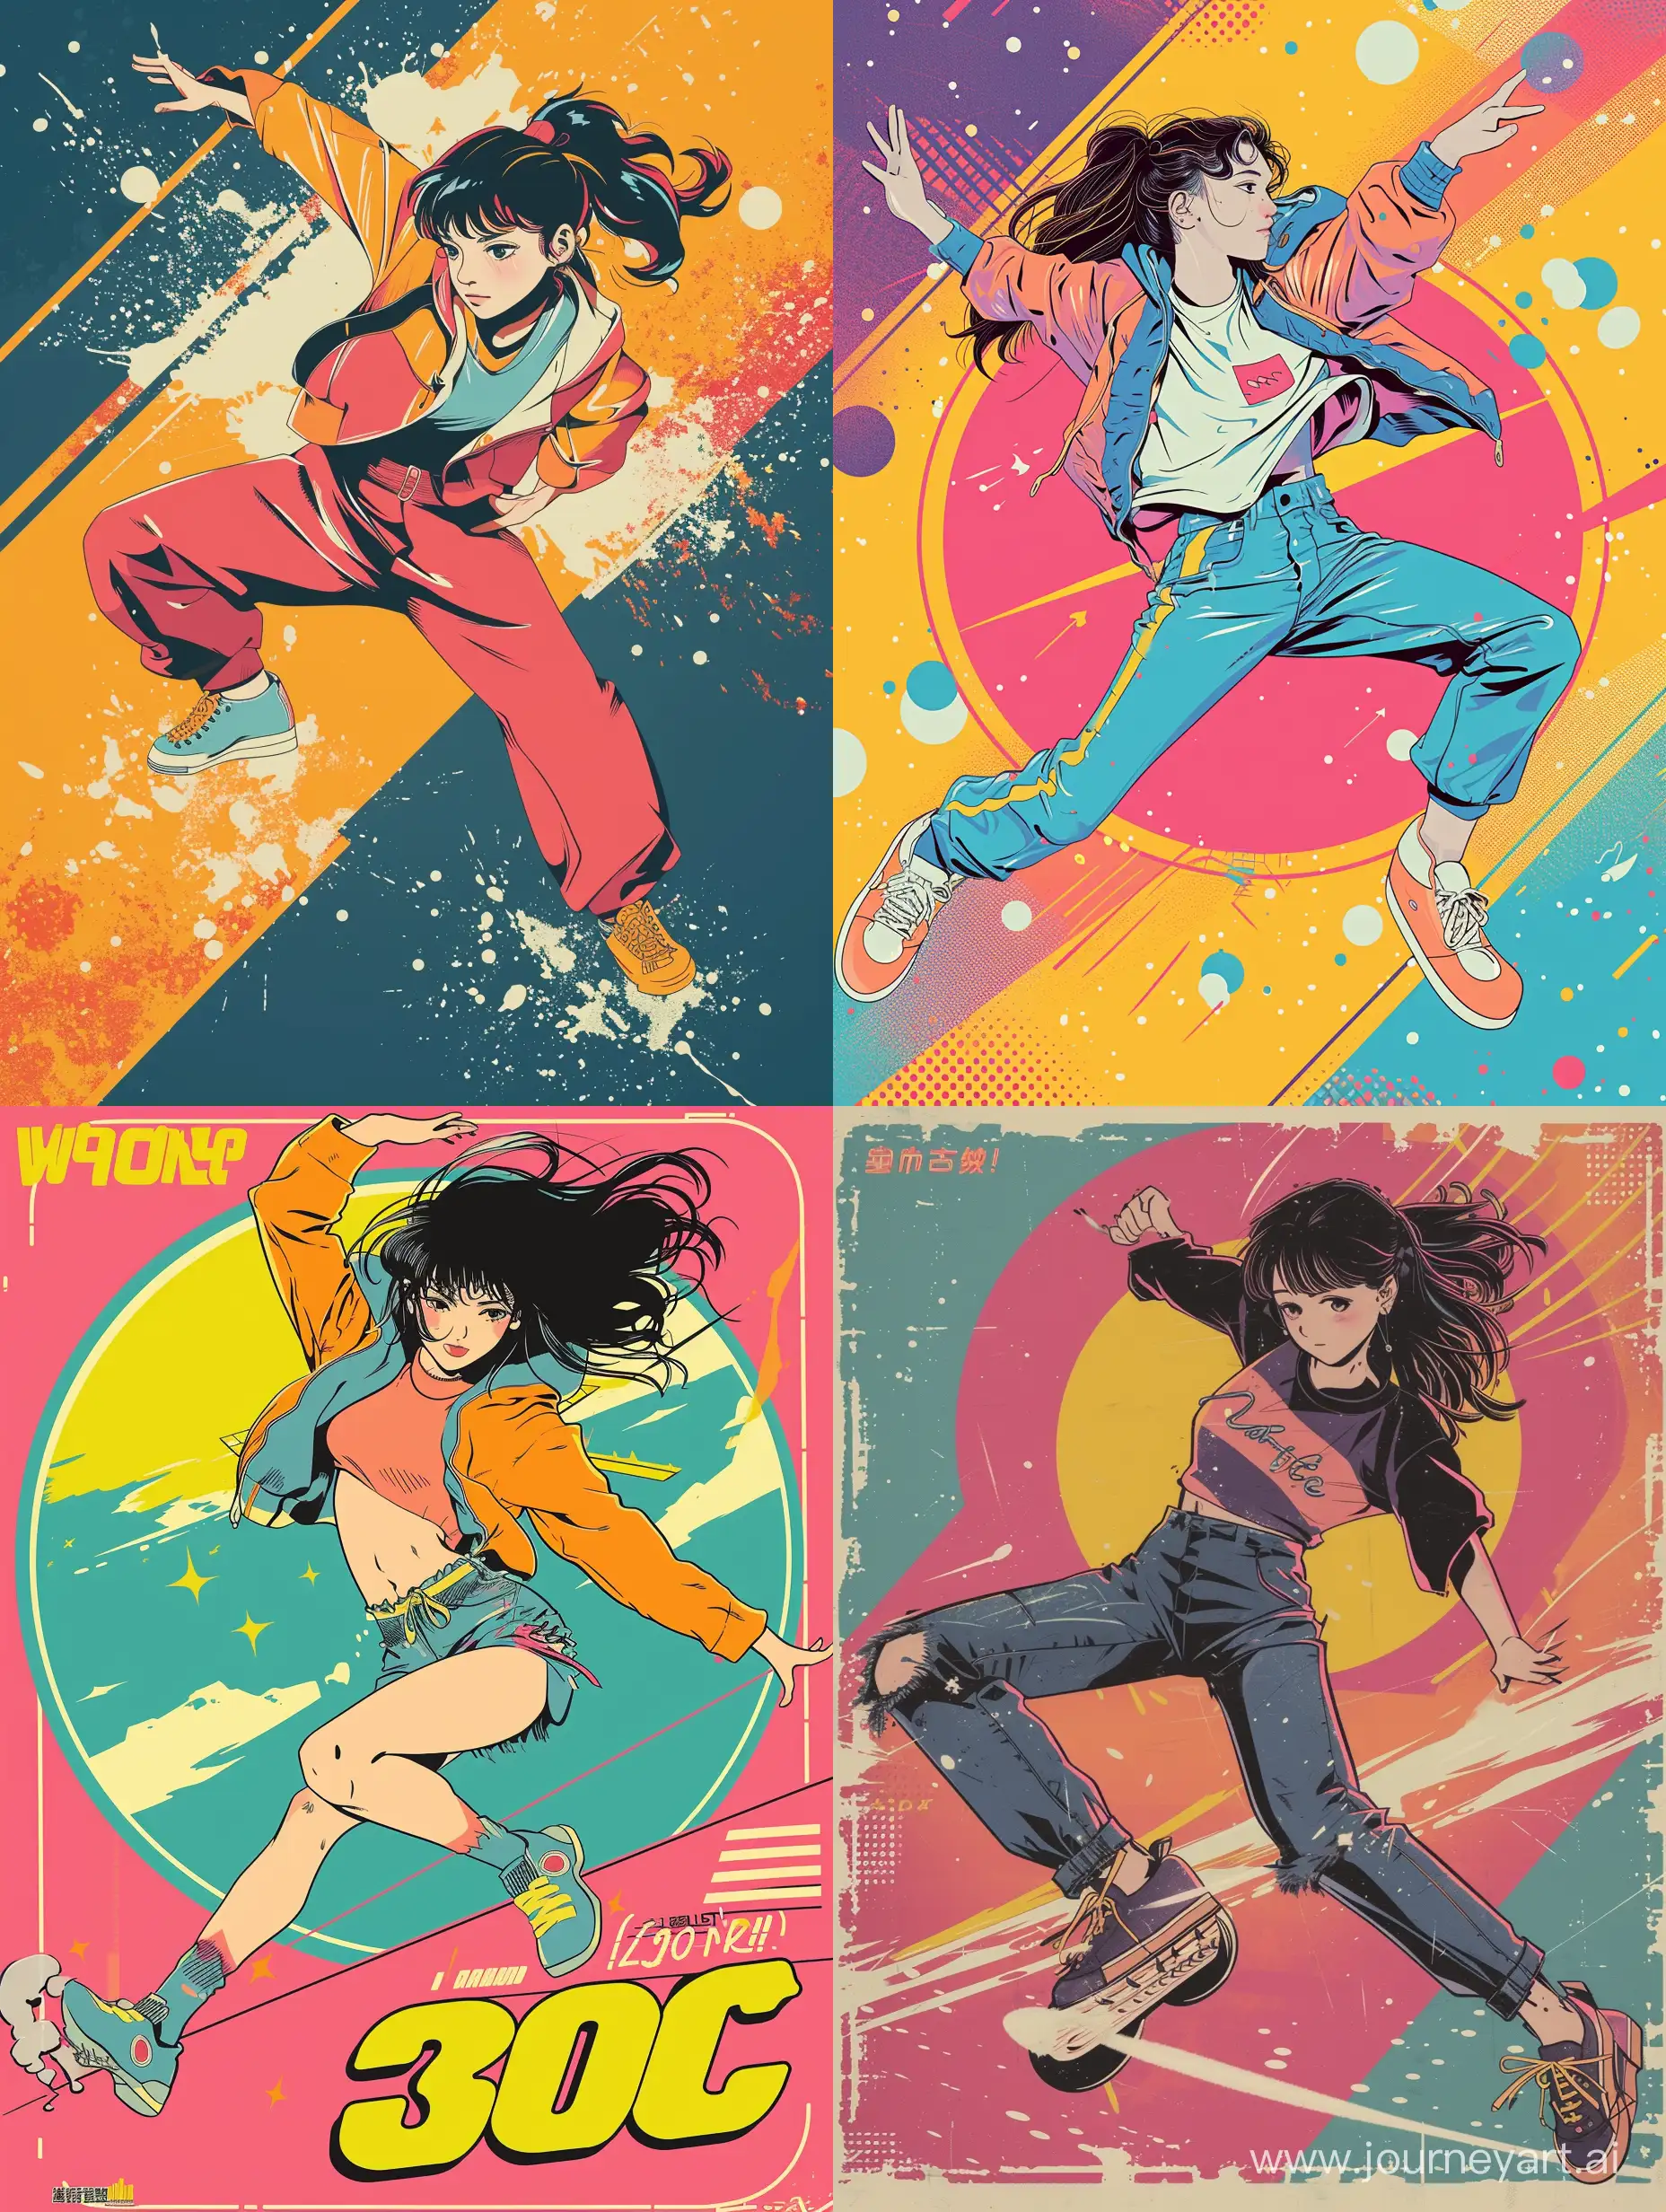 Dynamic-80s-Anime-Poster-Featuring-Girl-in-Action-Pose